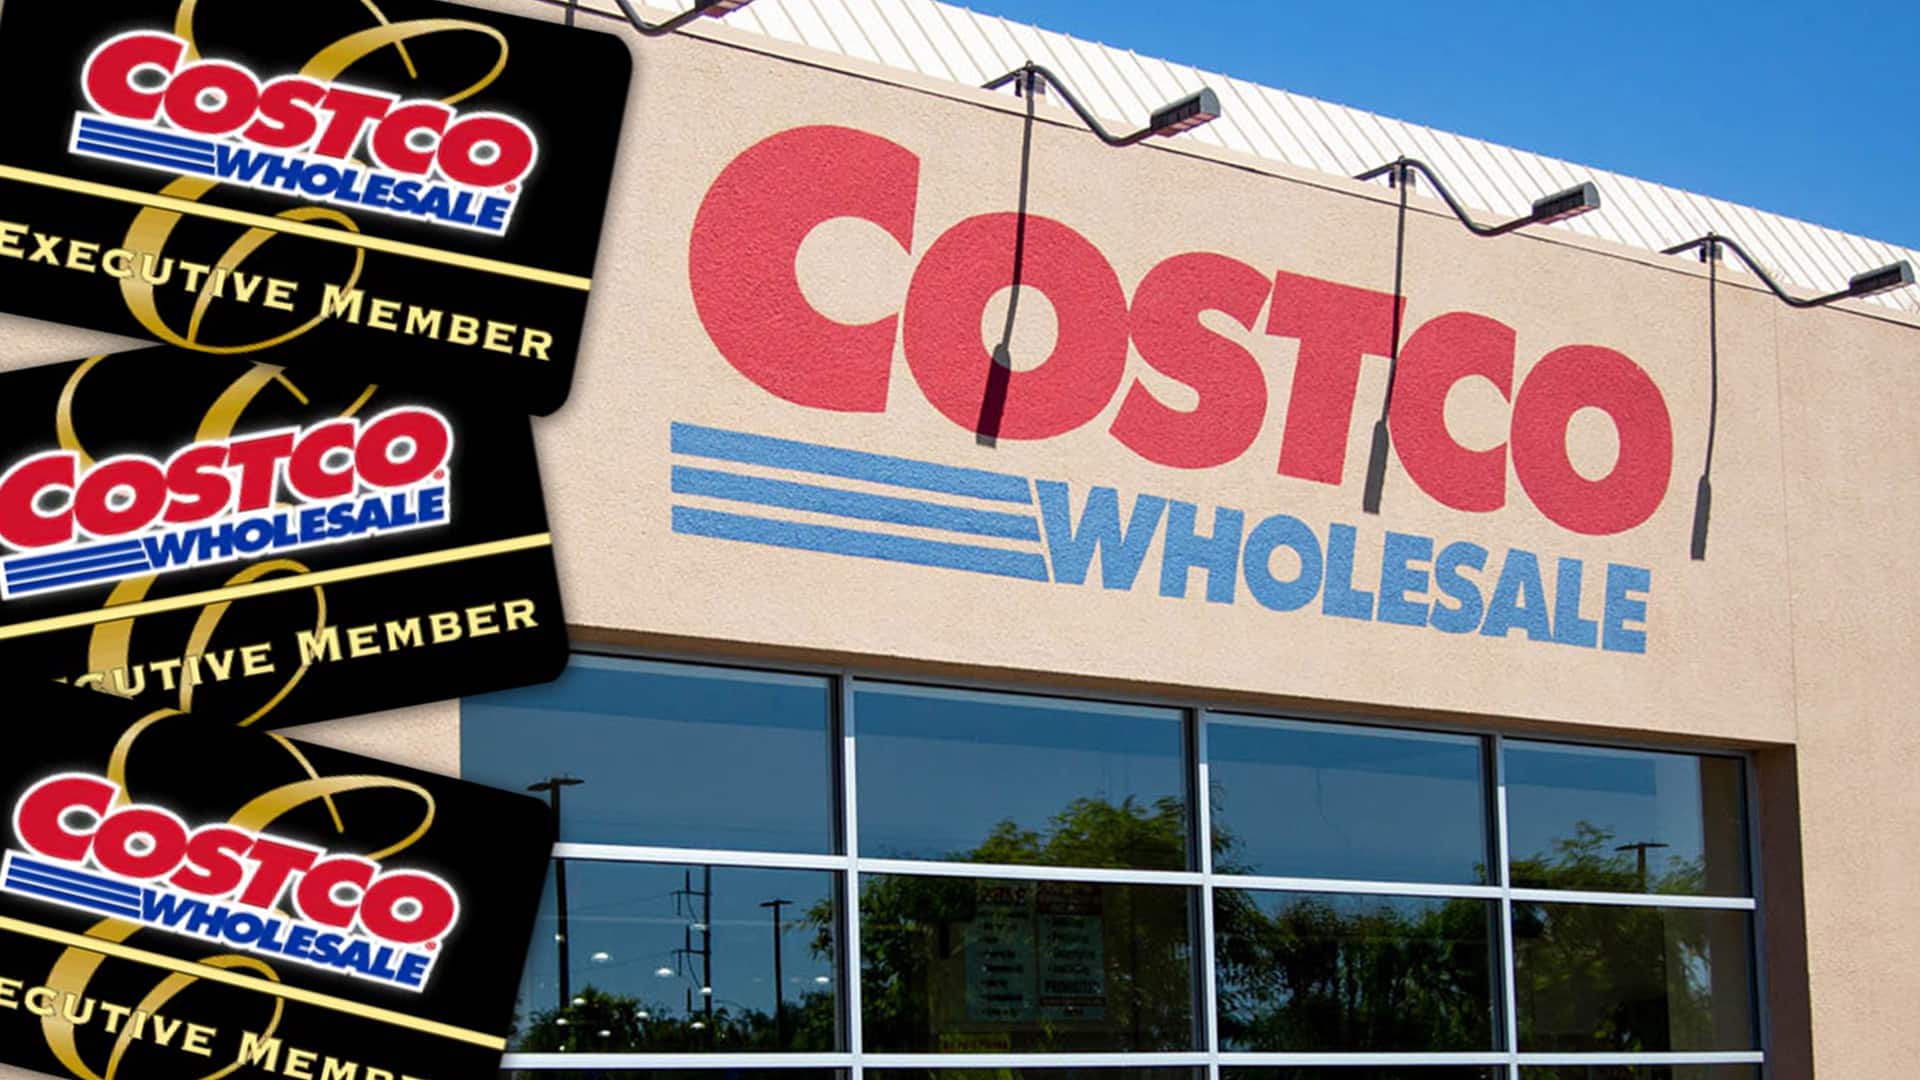 costco executive membership cards and storefront